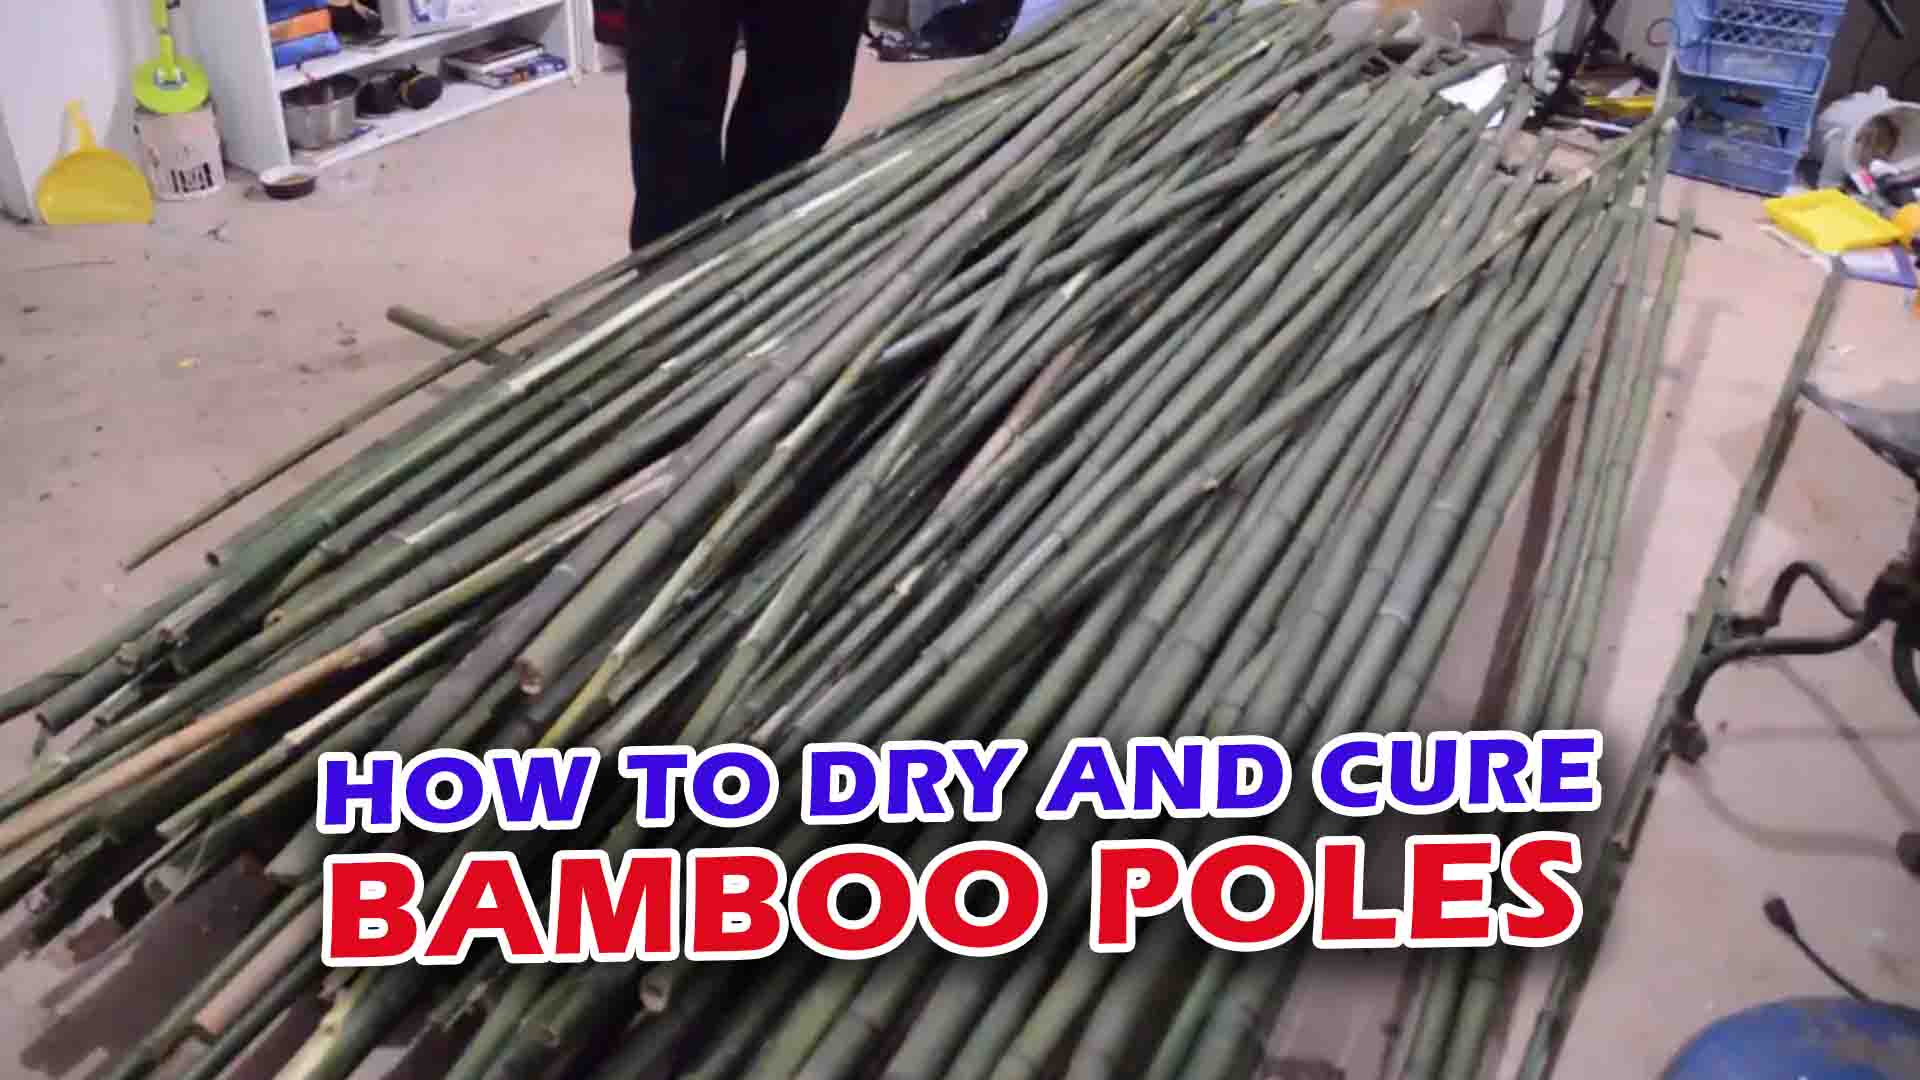 How to Dry and Cure Bamboo Poles